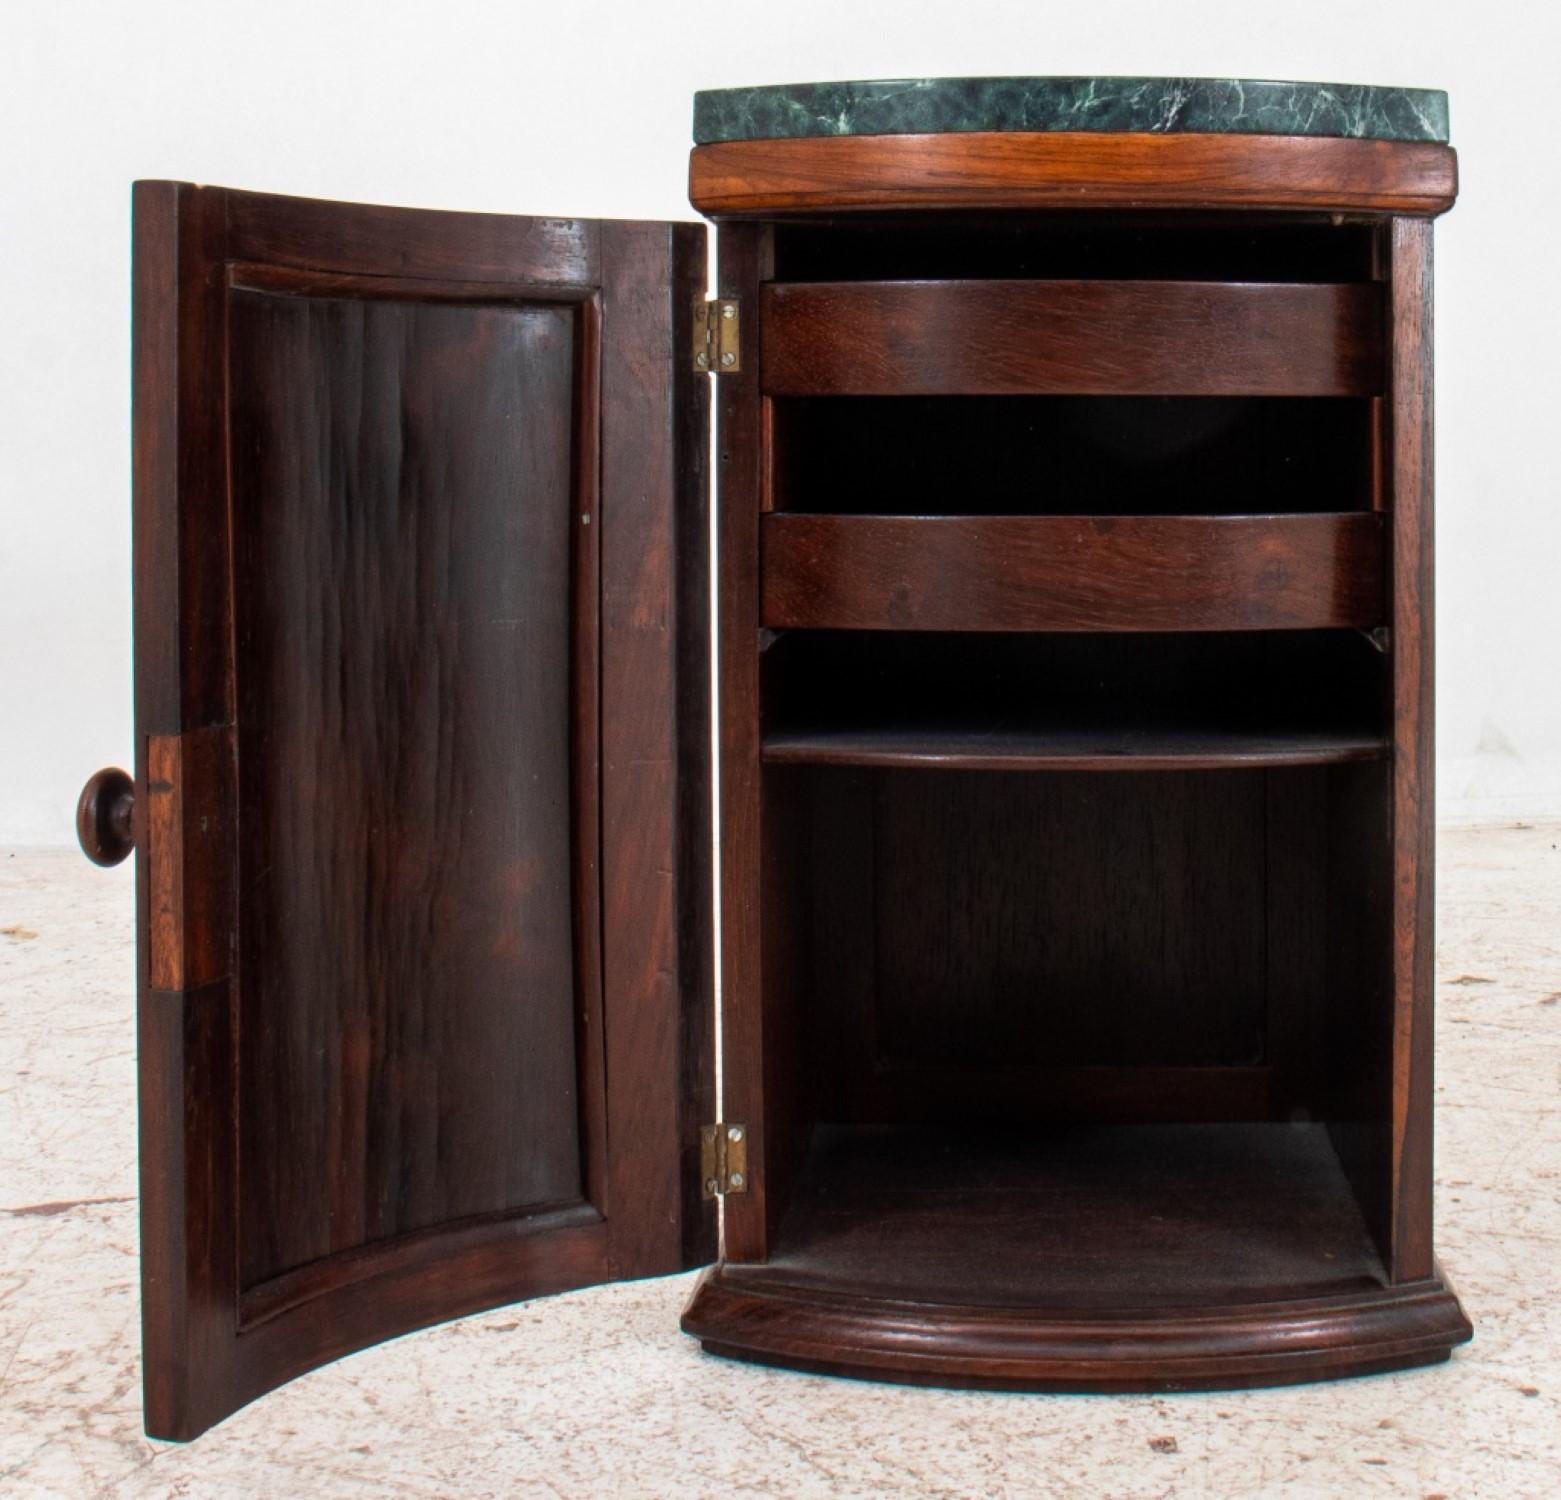 Chippendale style mahogany secretary bookcase. Here are the details:

Style: Chippendale
Material: Mahogany
Features:
Scrolling broken swan's neck pediment finial
Glass cabinet door with green lacquered interior and three shelves
Slant front